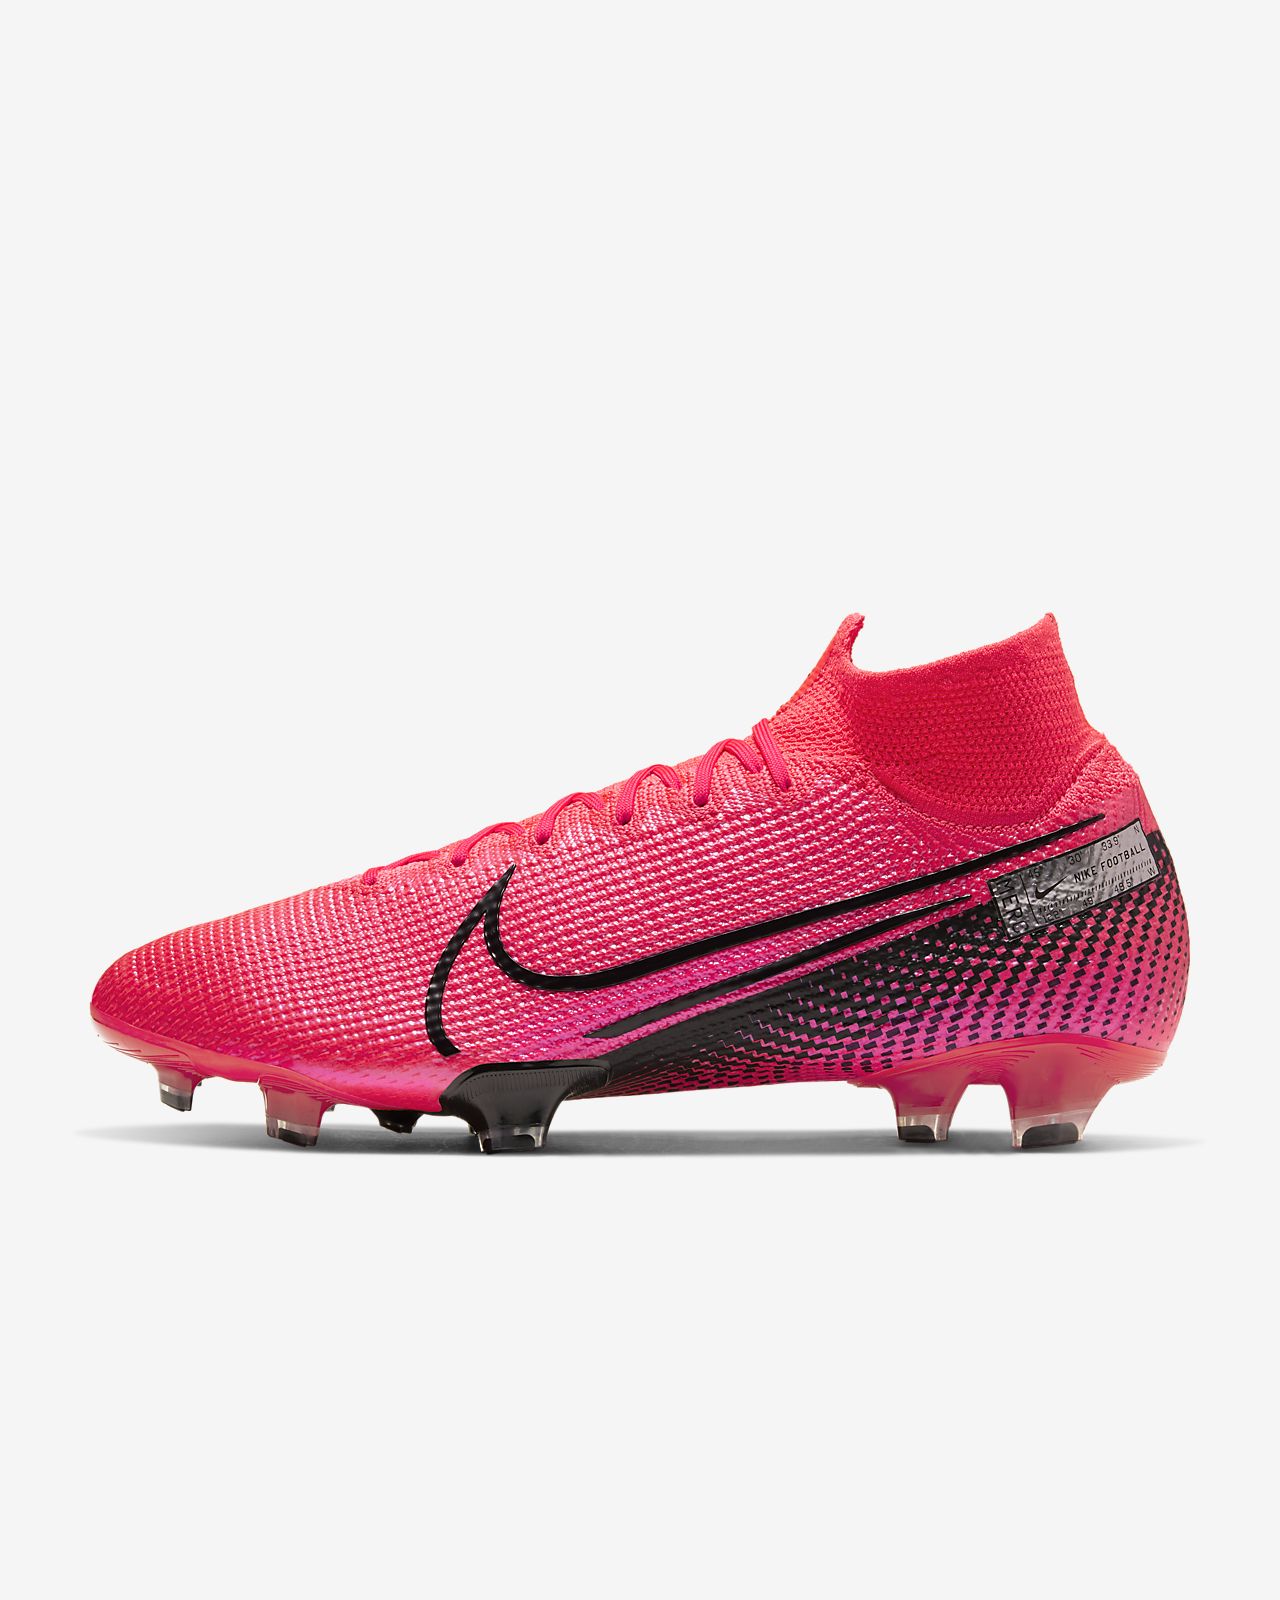 Product model nike mecurial superfly 6 elite fg mens 303810.